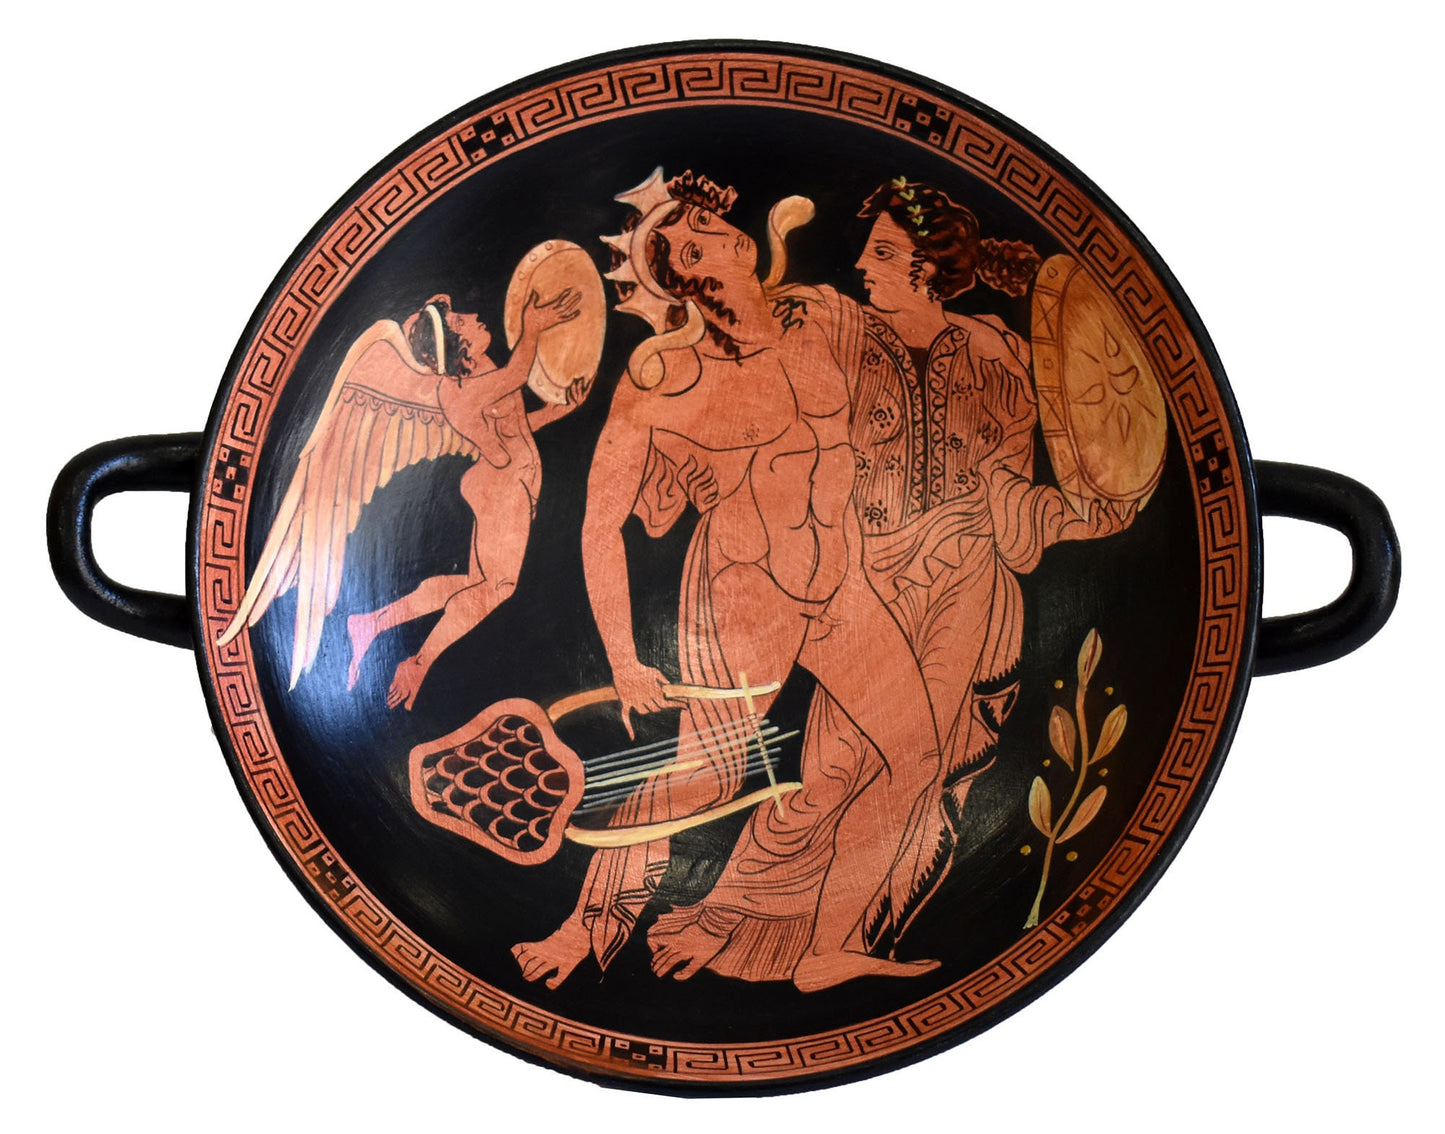 Revel of Dionysus and Ariadne - Eros - Small Red Figure Kylix Vase - 390 BC - The Meleager Painter - British Museum - Replica